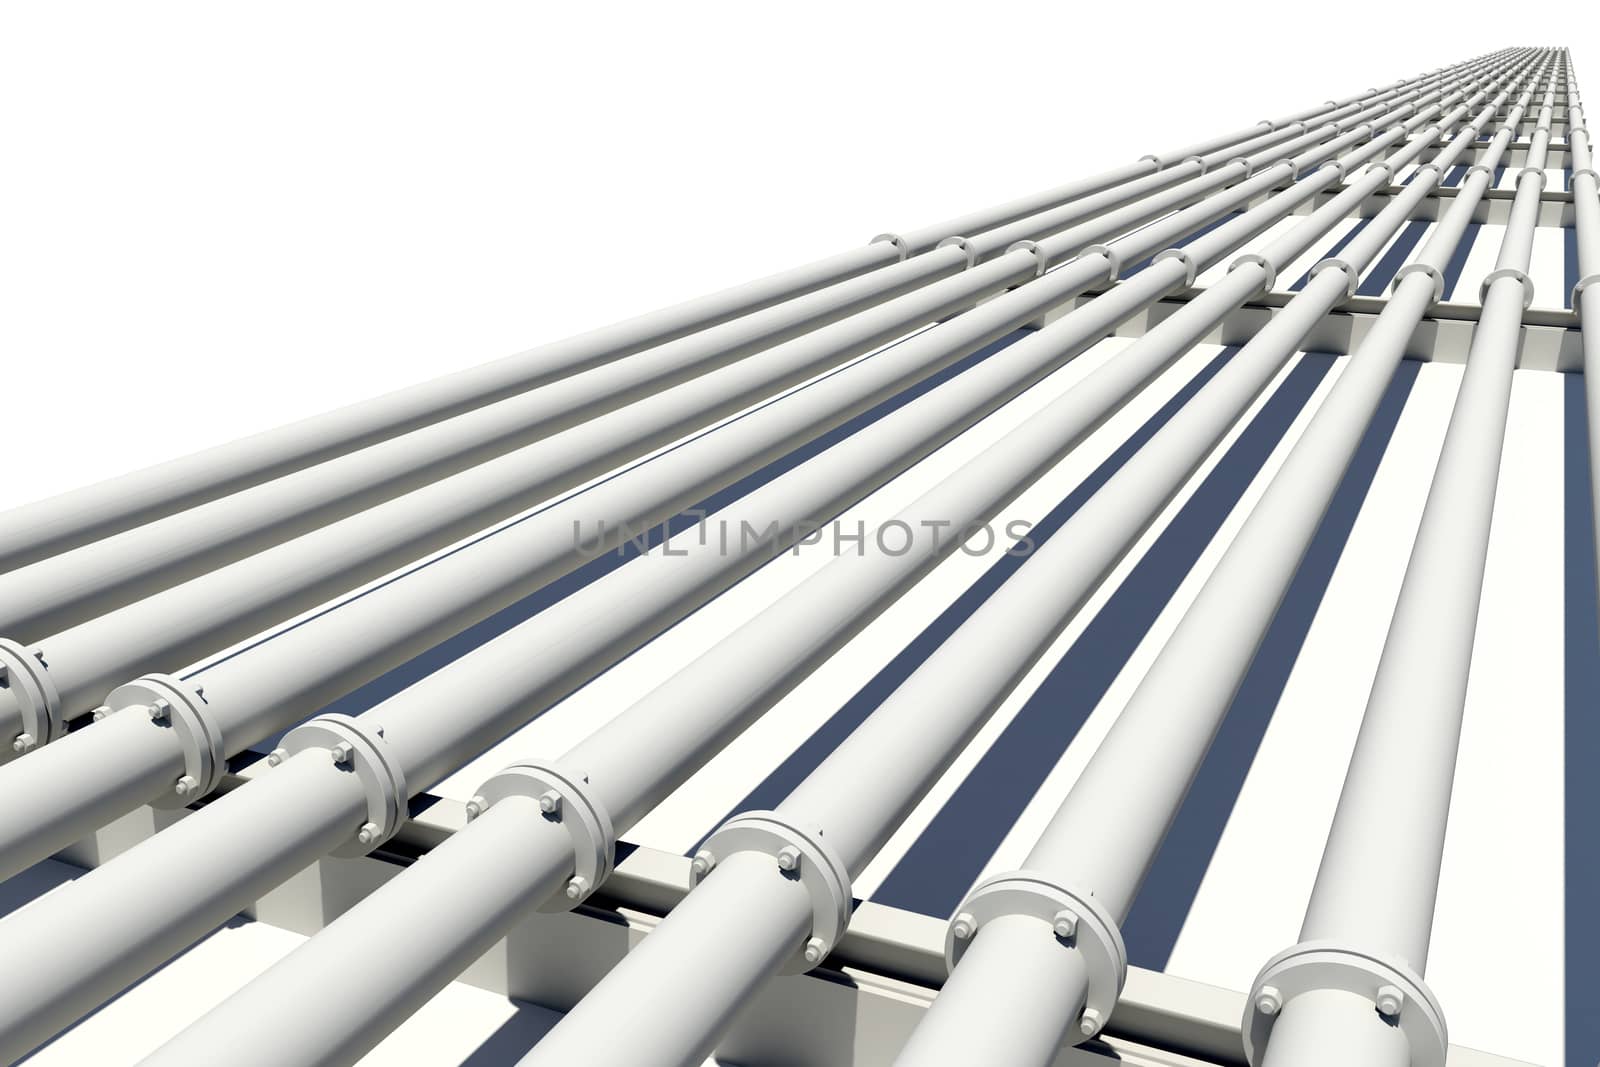 Many pipes stretching into distance. Isolated on white background